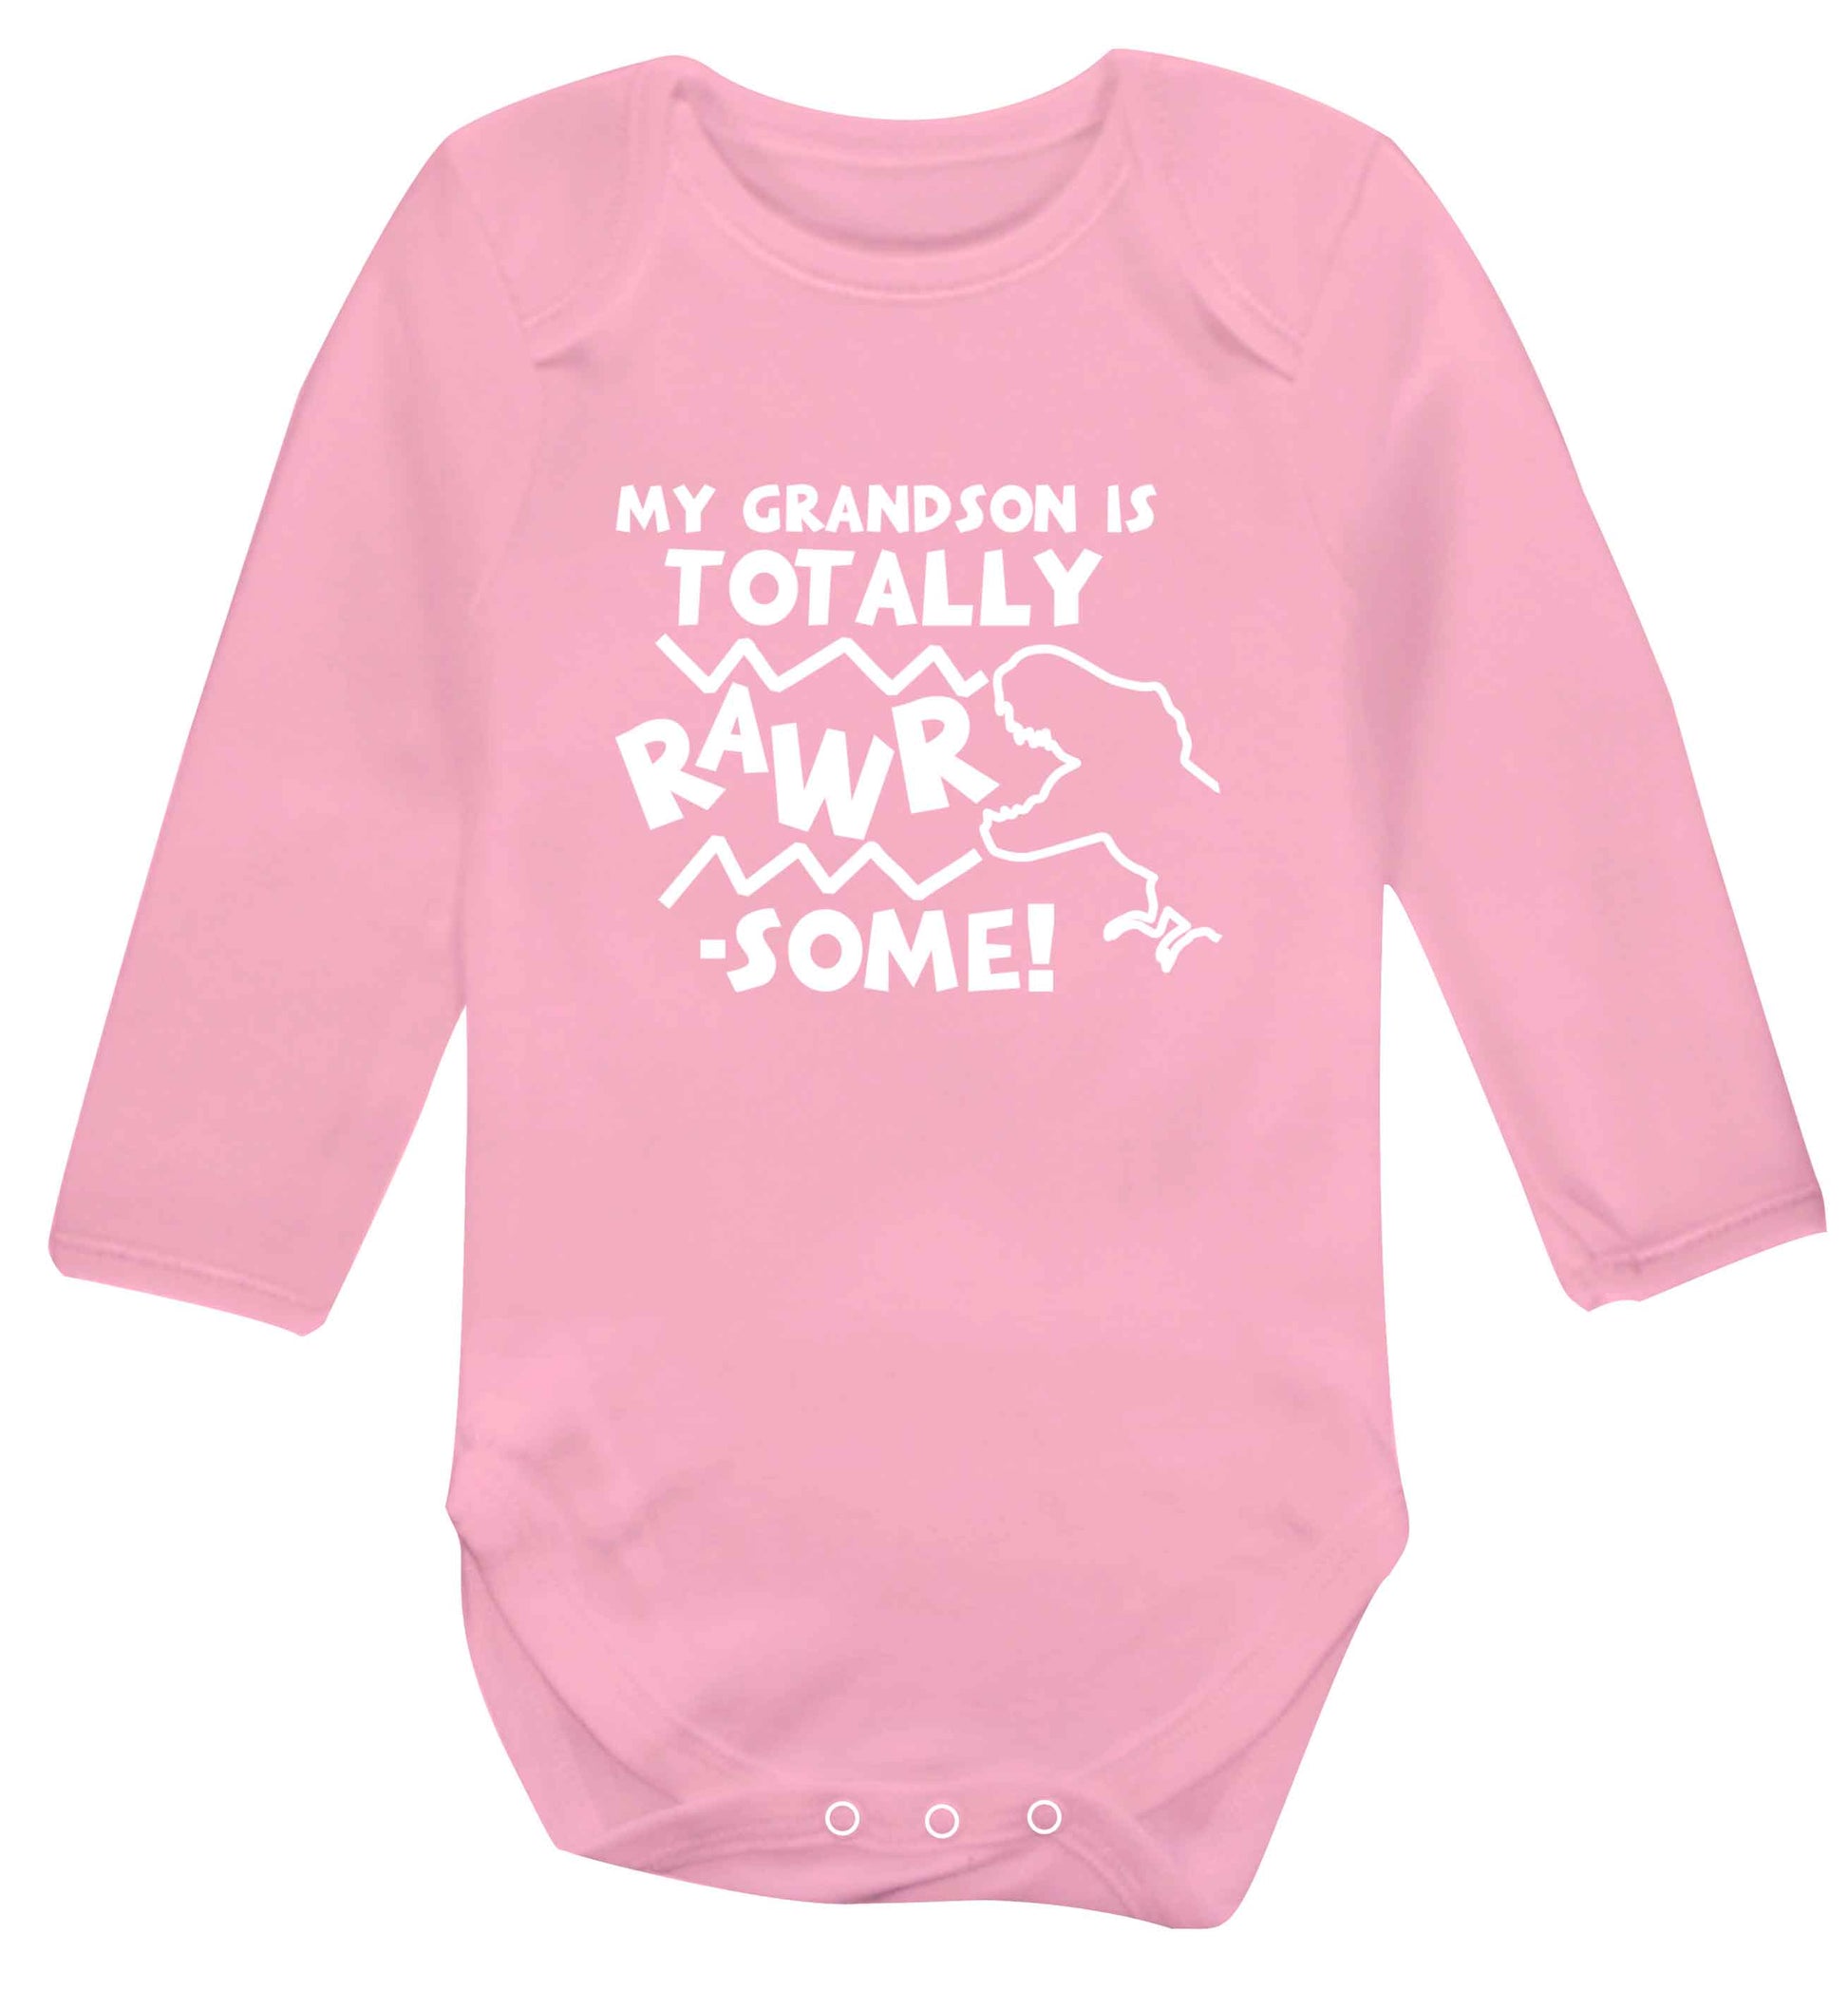 My grandson is totally rawrsome baby vest long sleeved pale pink 6-12 months